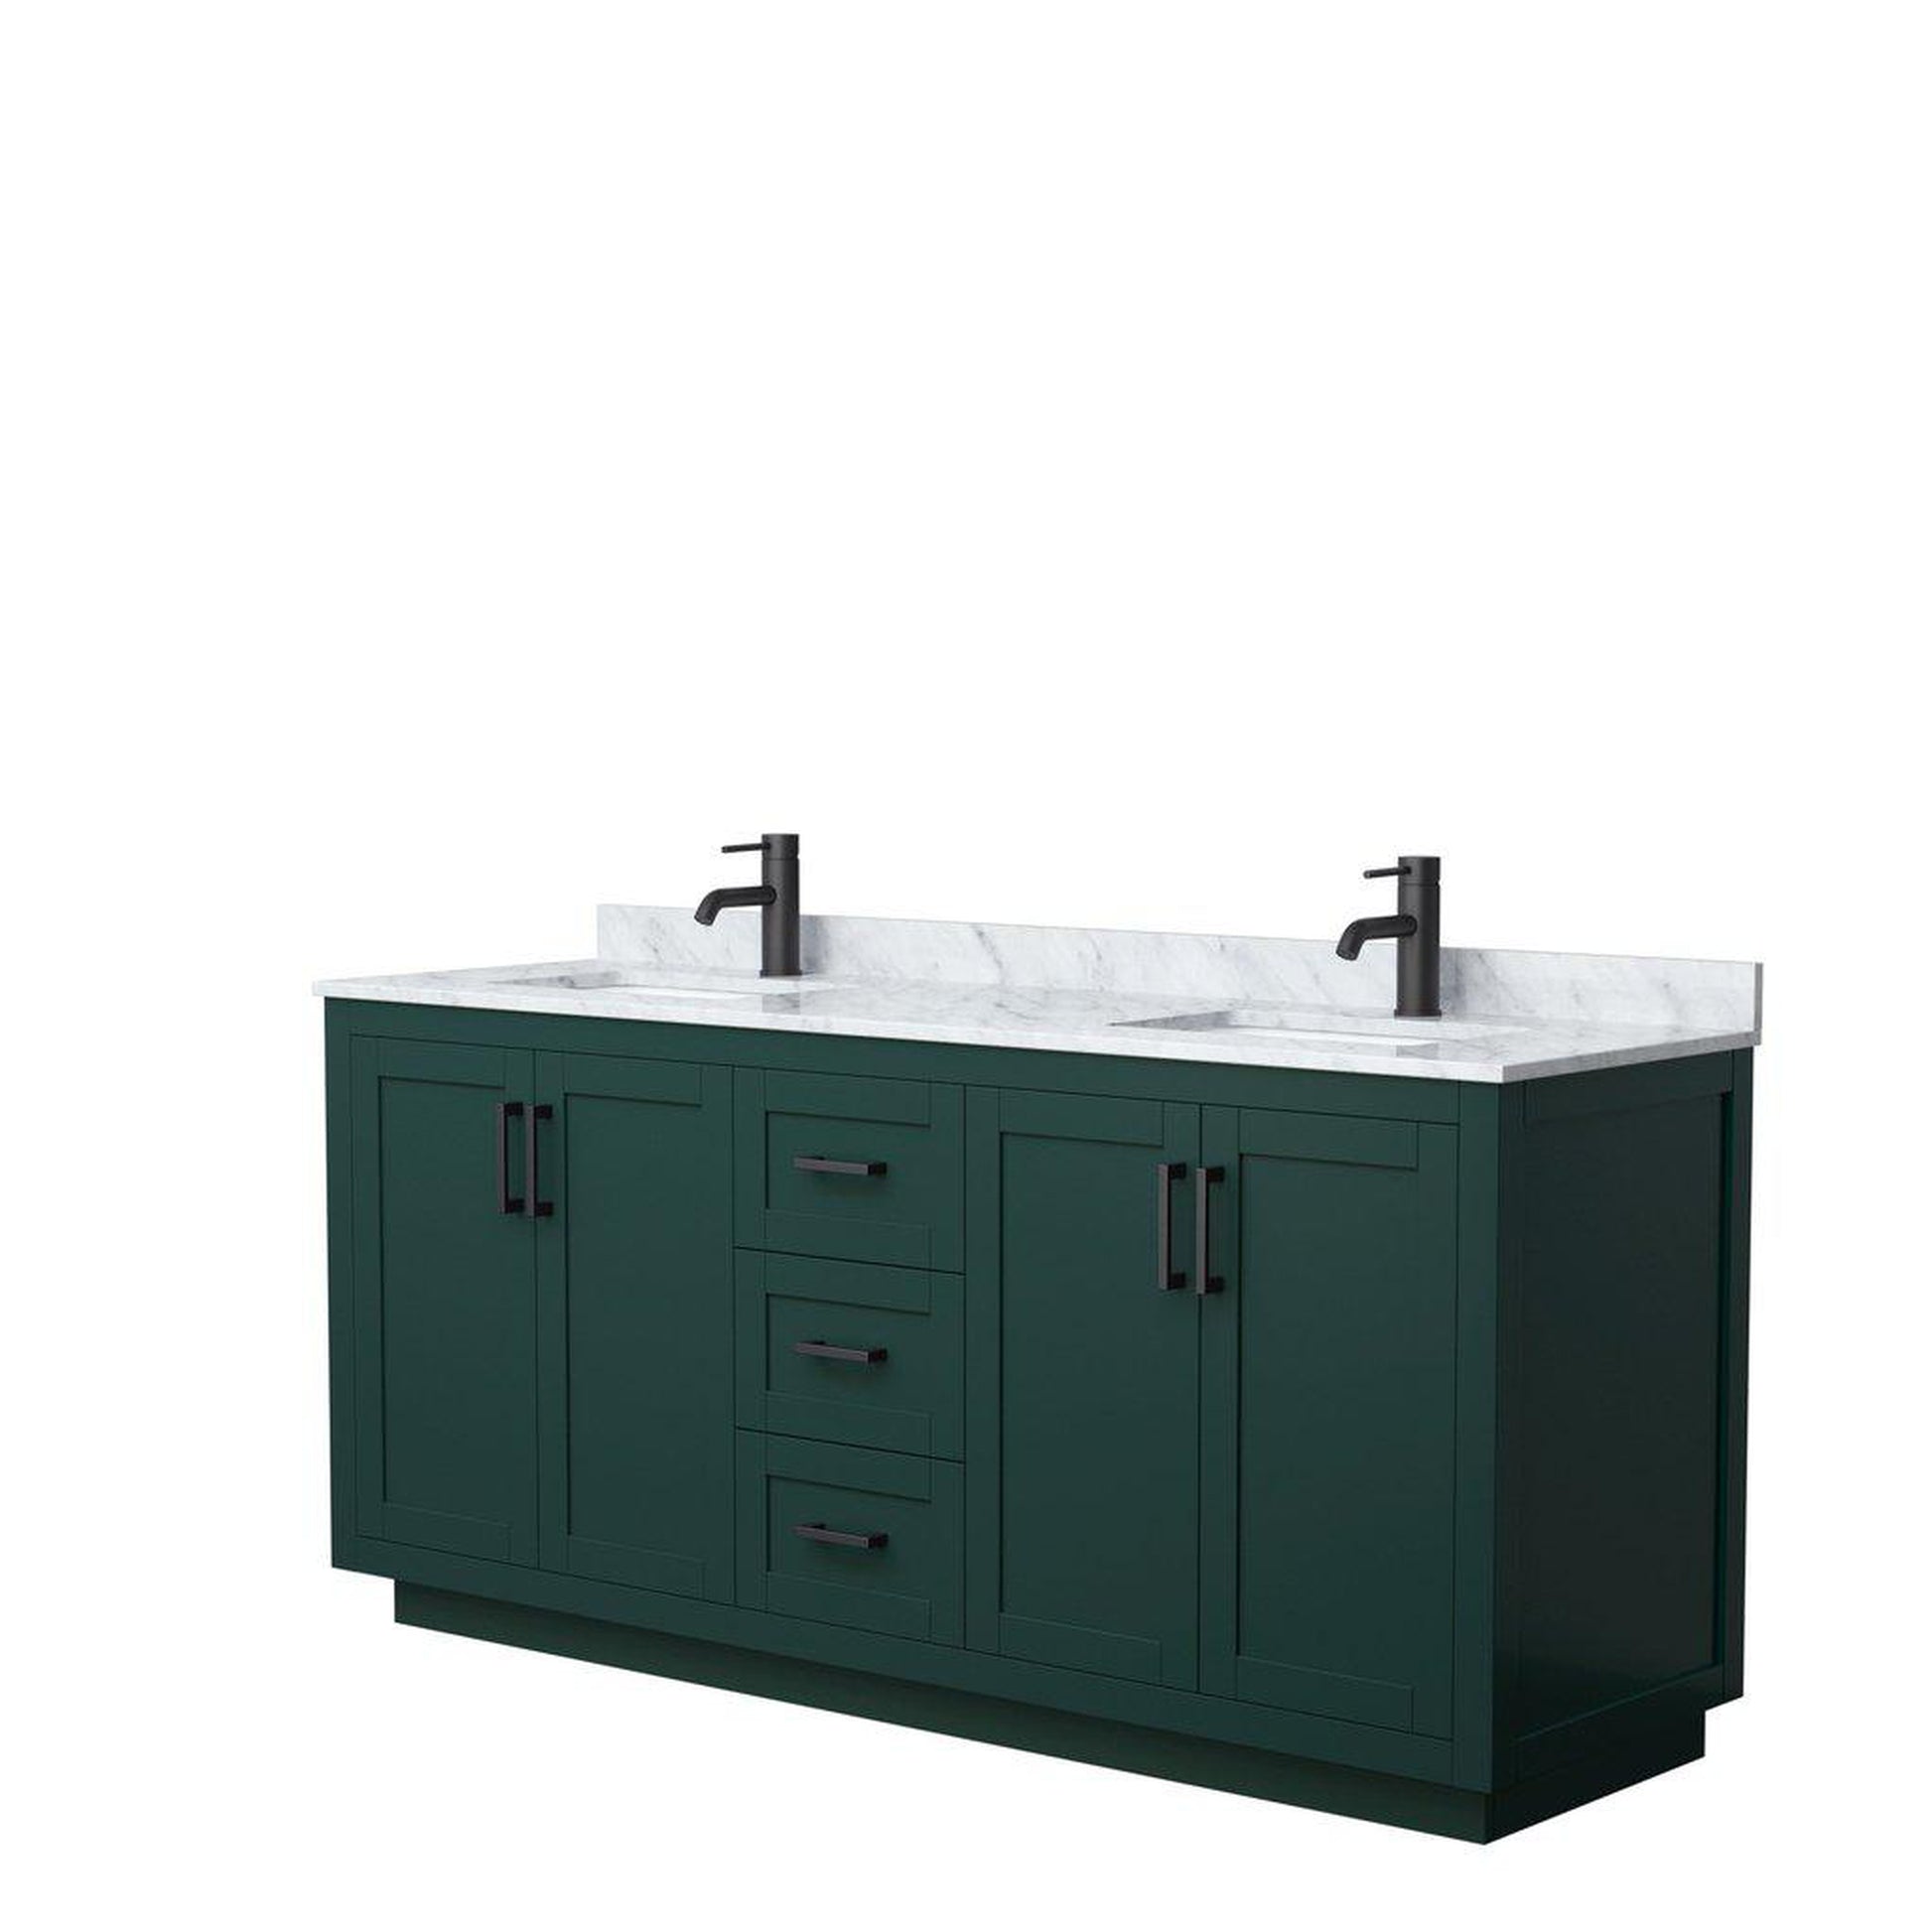 Wyndham Collection Miranda 72" Double Bathroom Green Vanity Set With White Carrara Marble Countertop, Undermount Square Sink, And Matte Black Trim